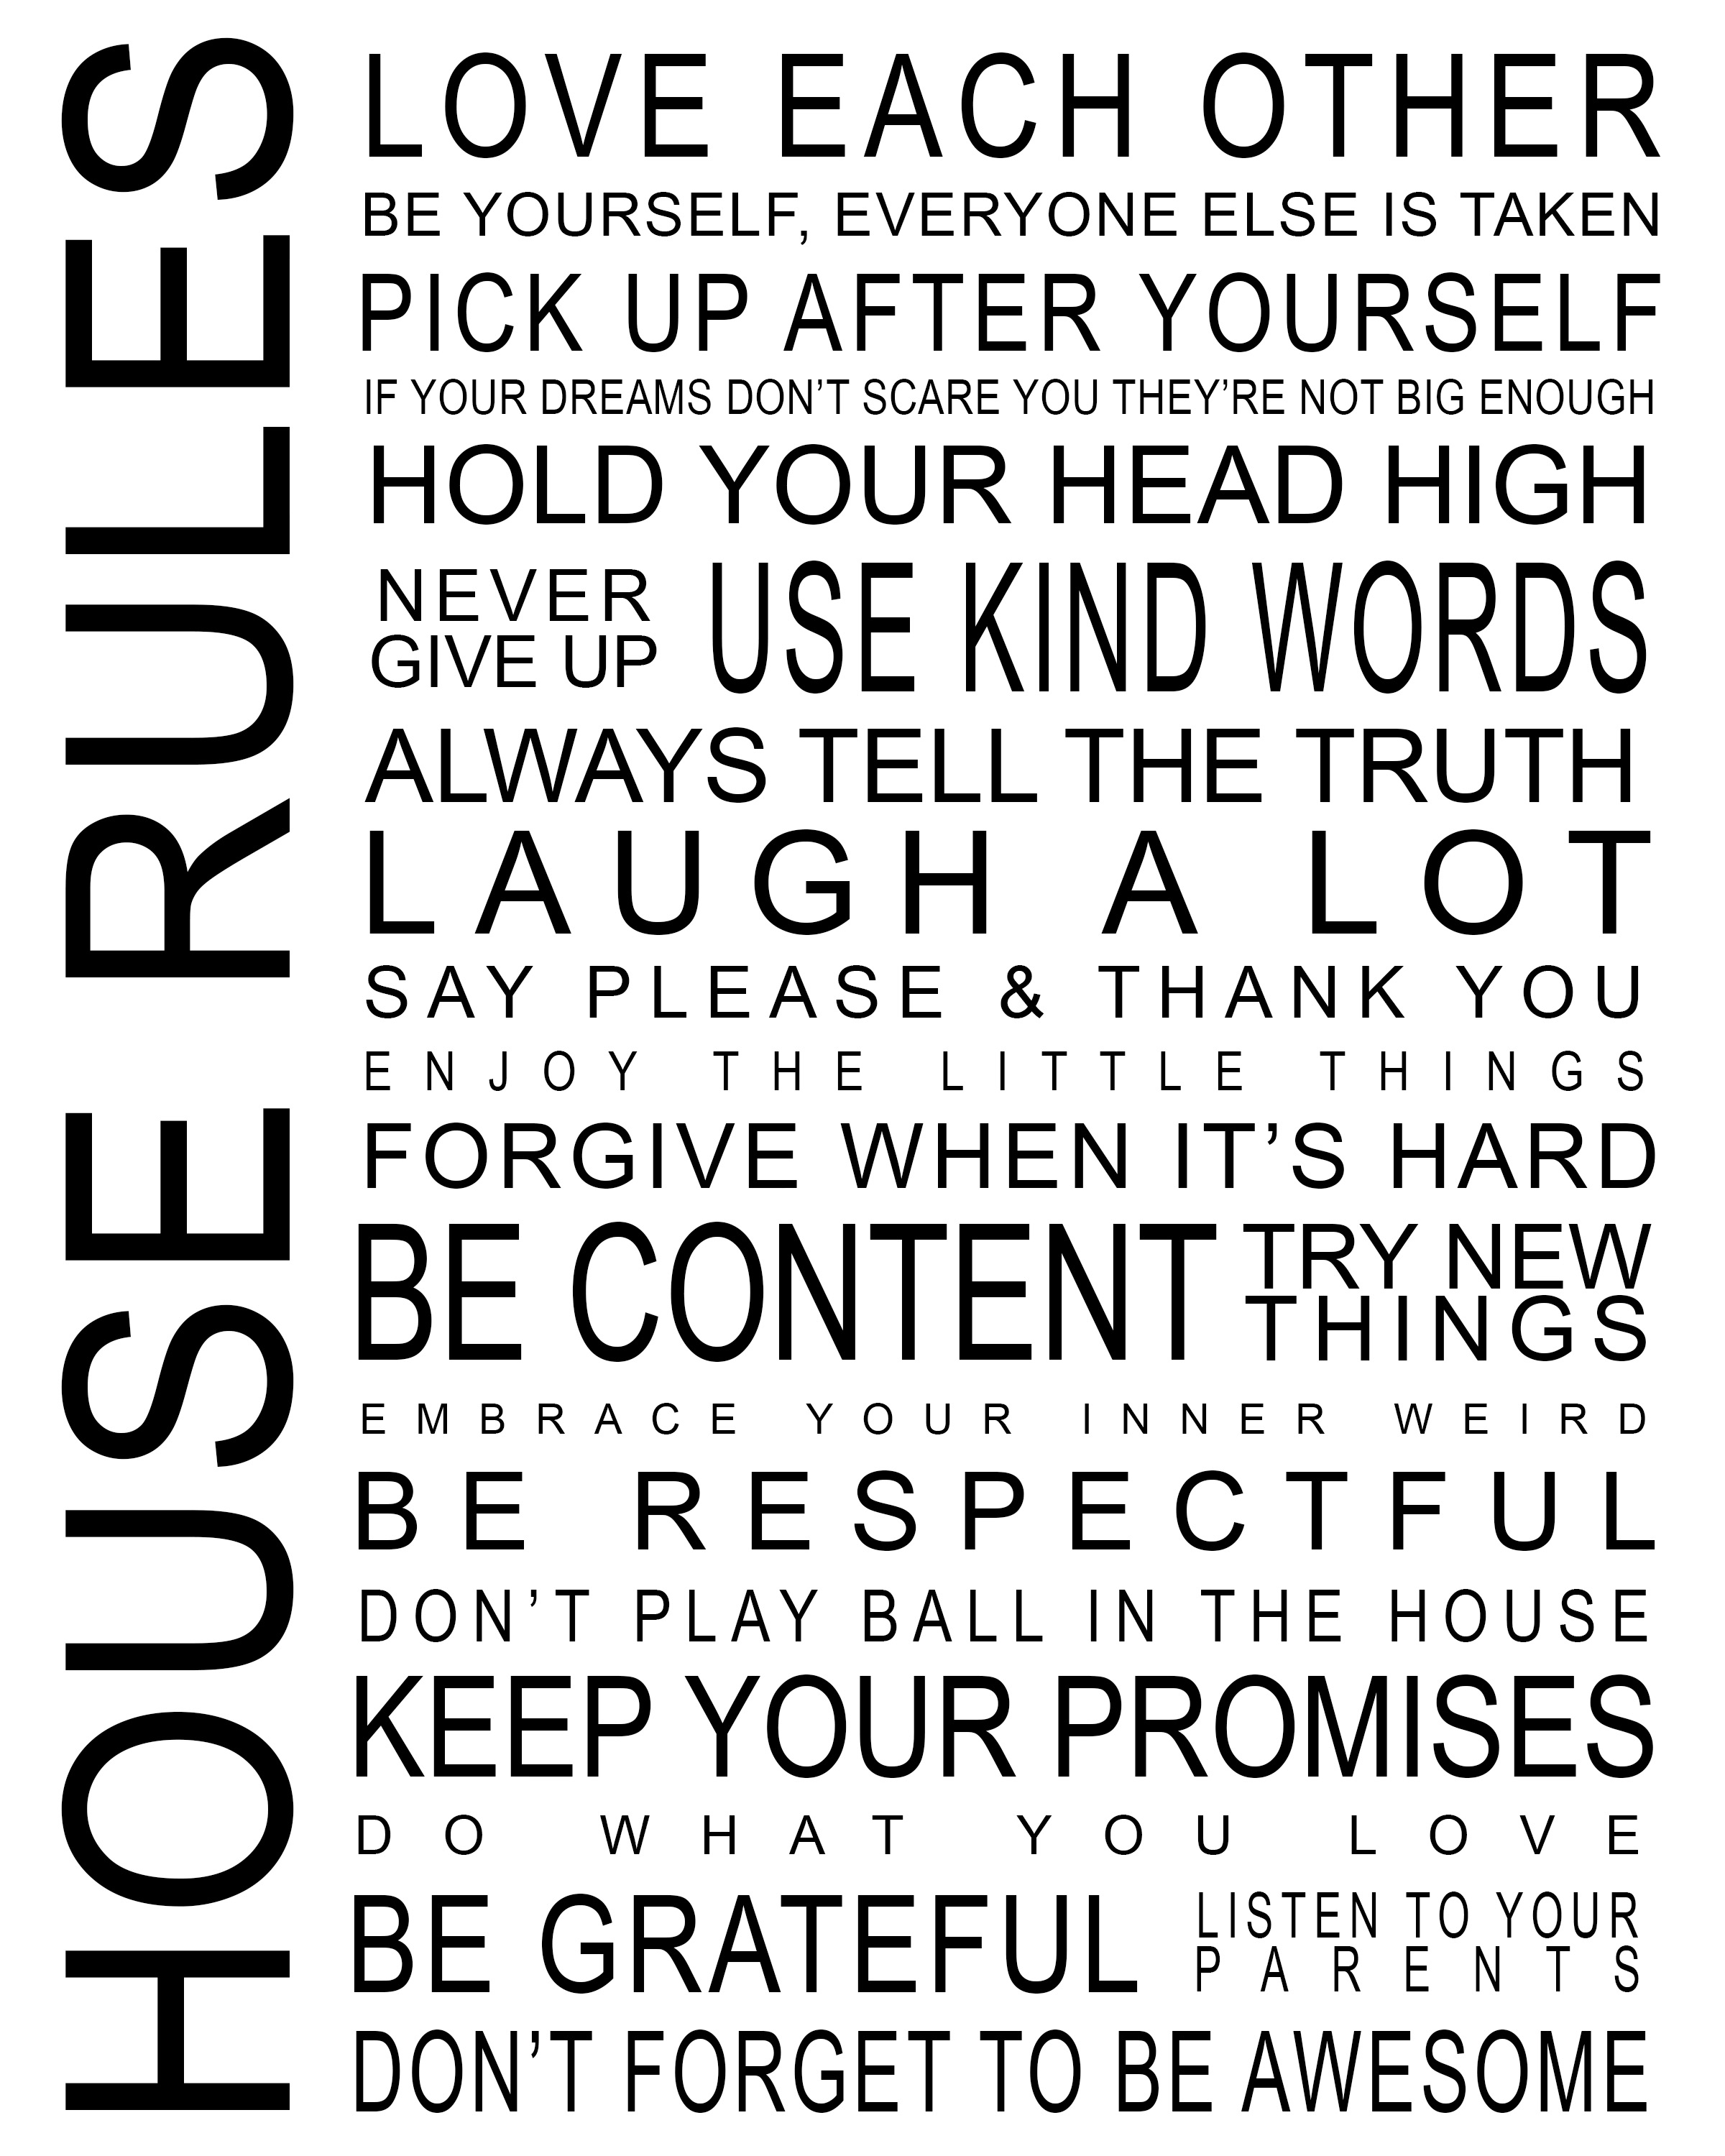 free-house-rules-printable-2-color-versions-designer-blogs